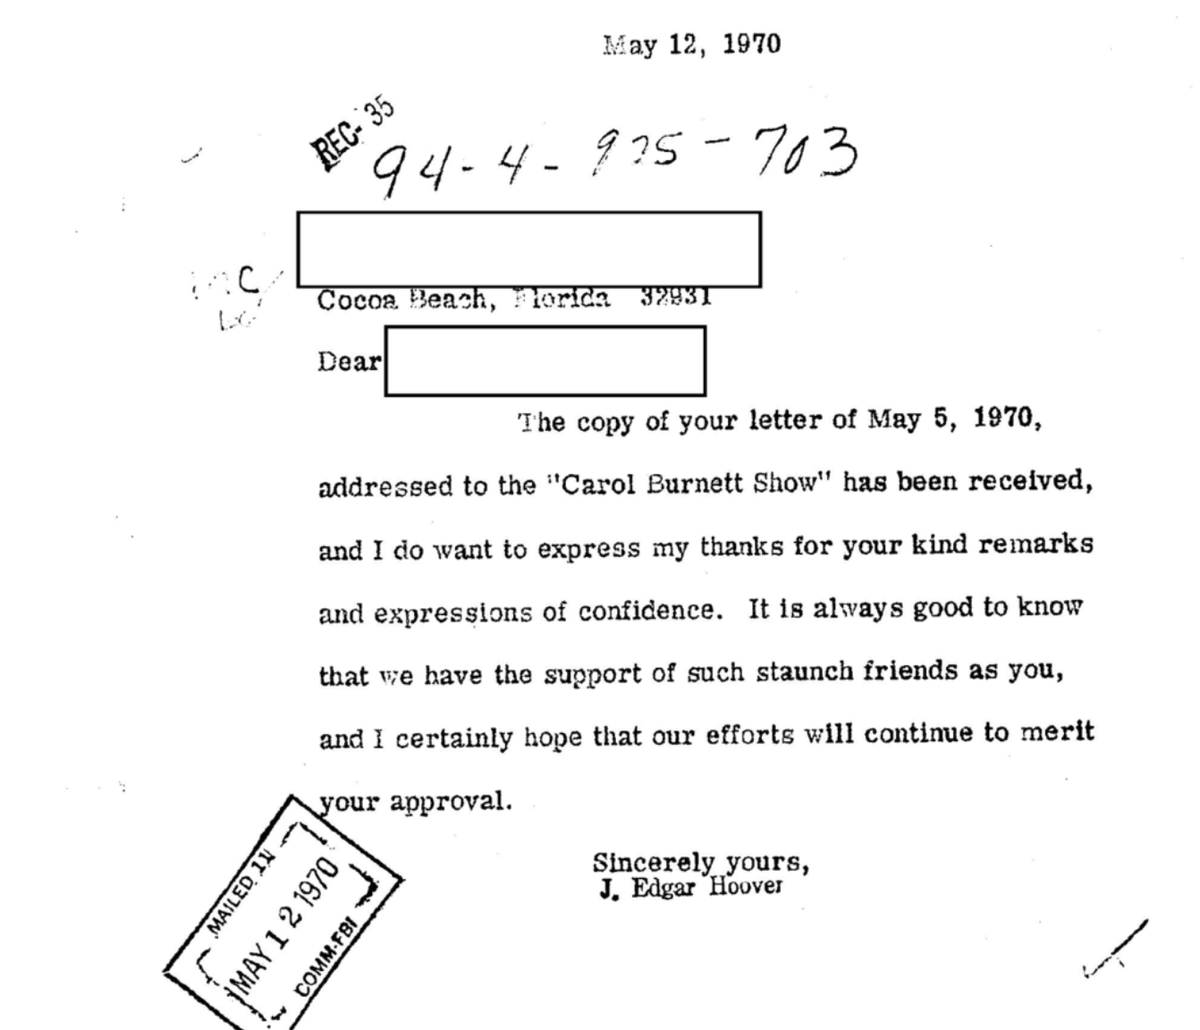 1970 - J. Edgar Hoover appreciated those who wrote to him to complain about the Carol Burnett Show.